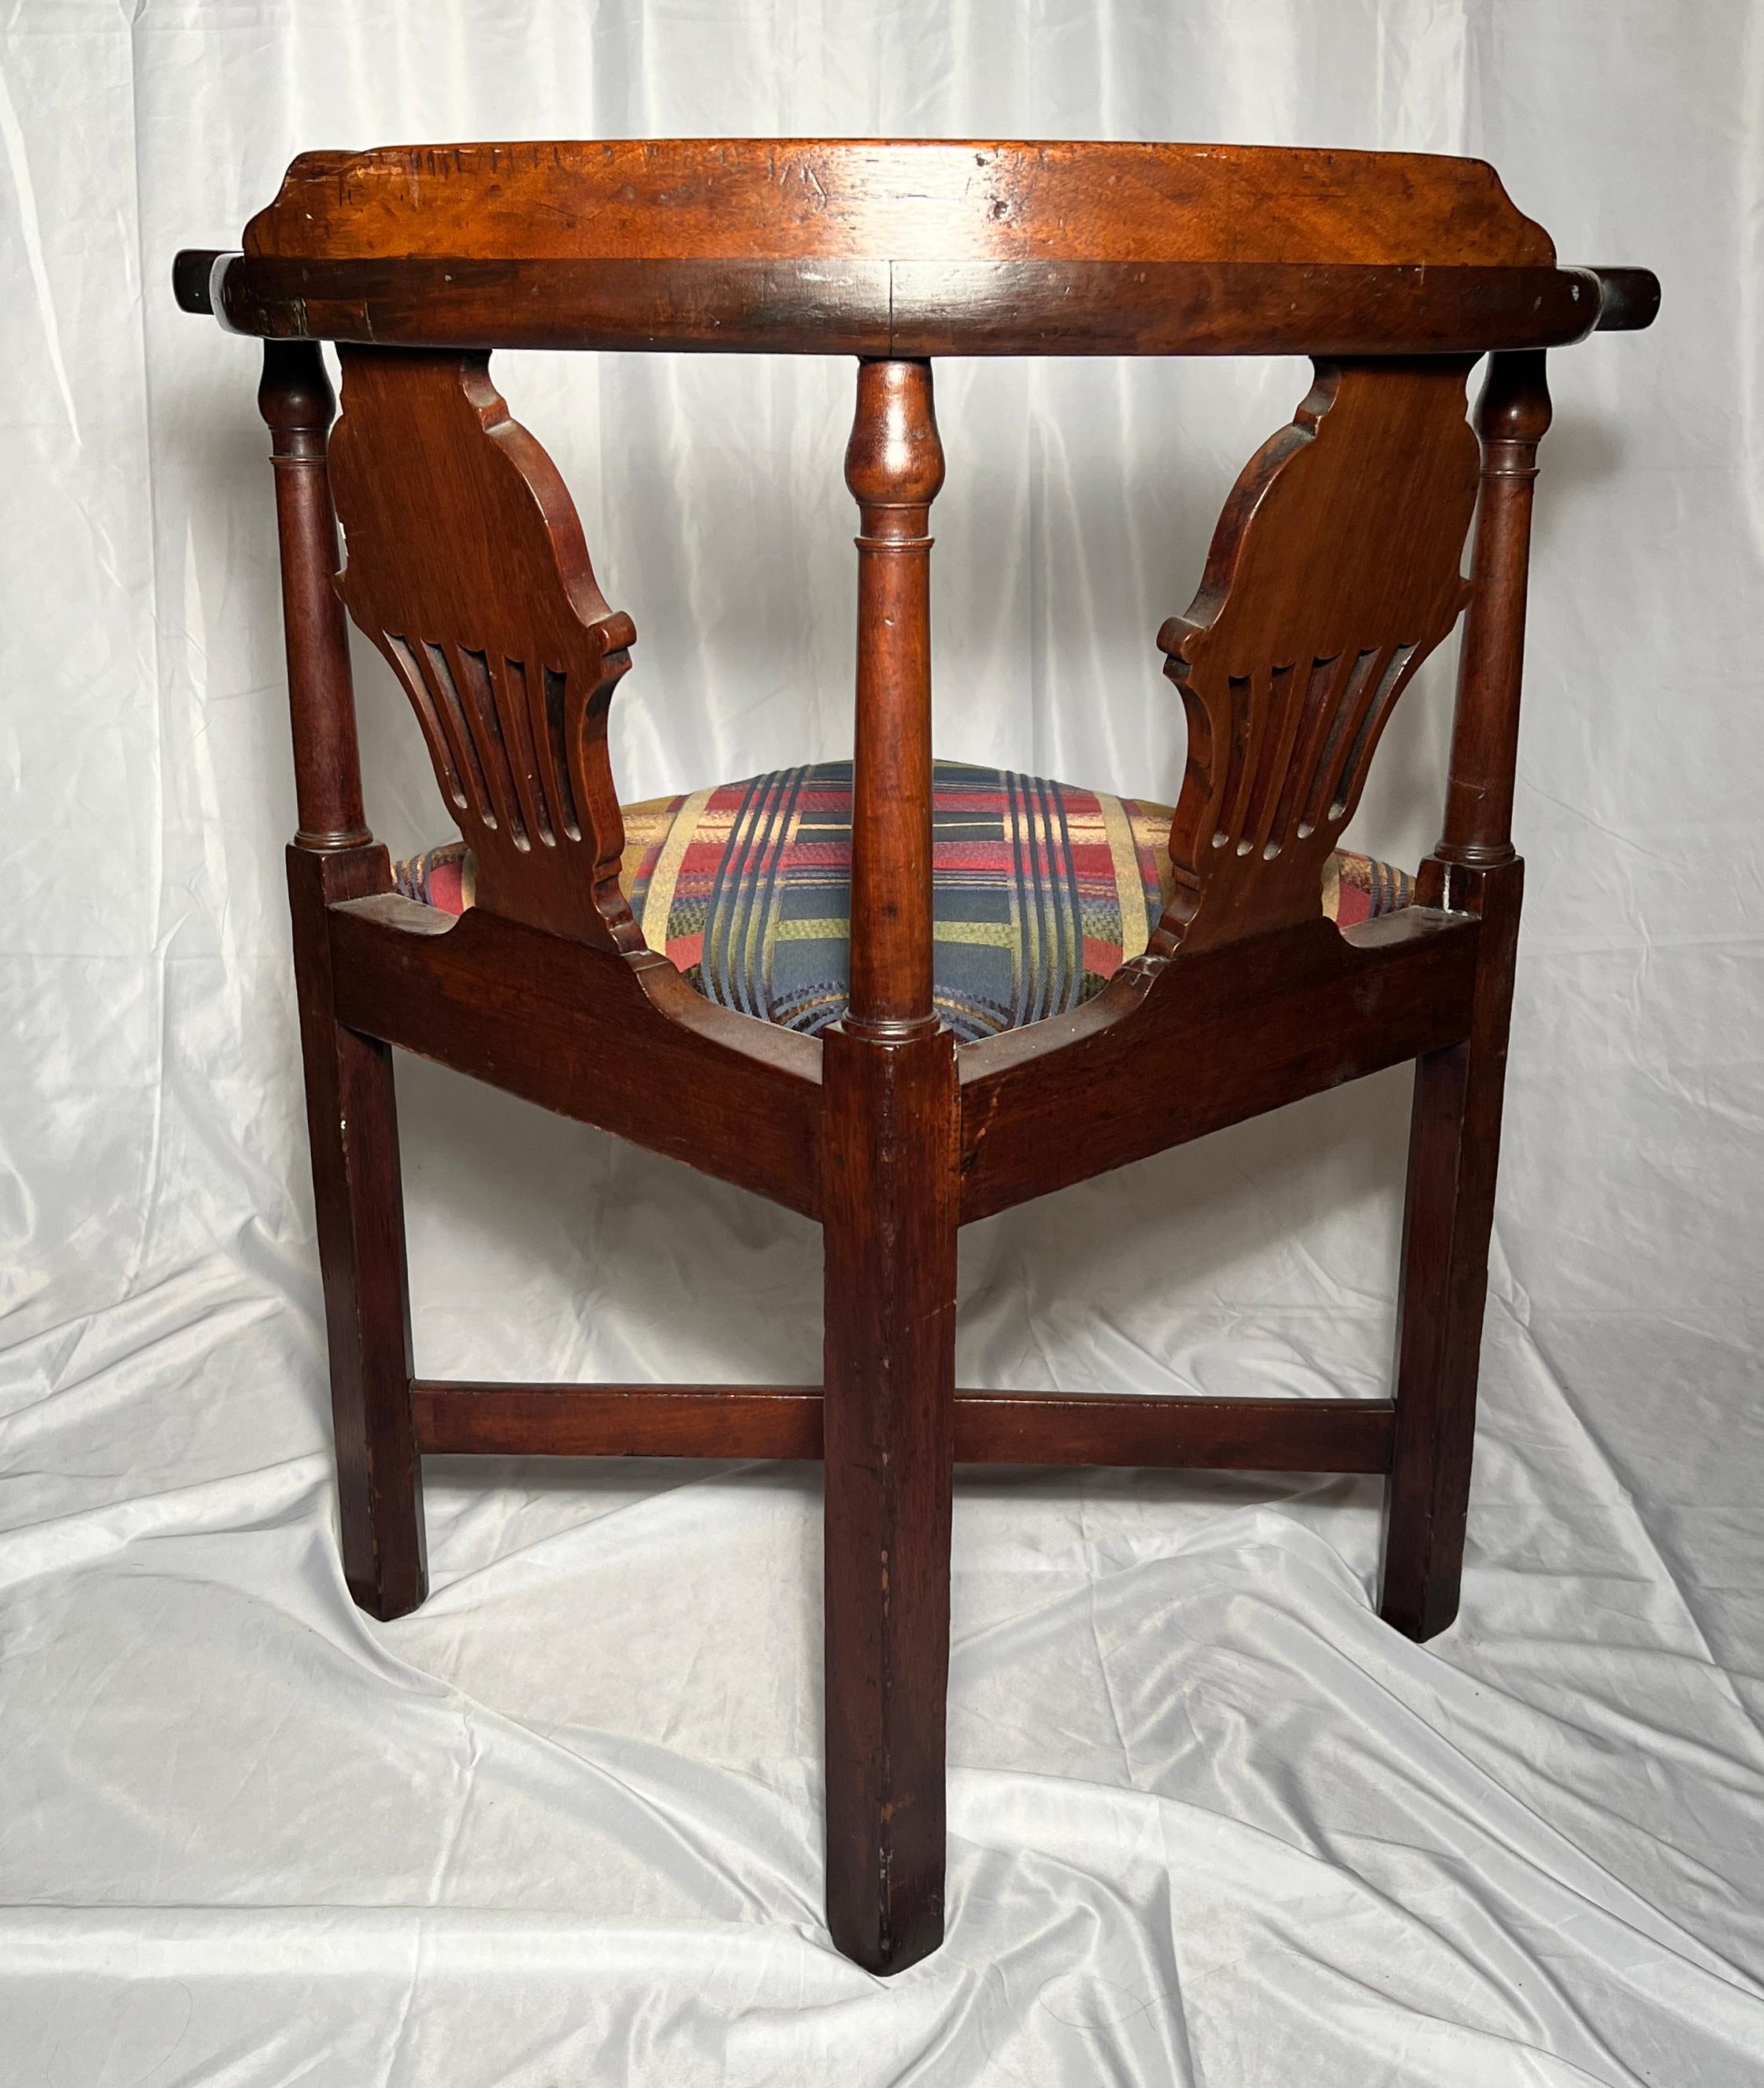 Antique English Mahogany Corner Chair circa 1880 In Good Condition For Sale In New Orleans, LA